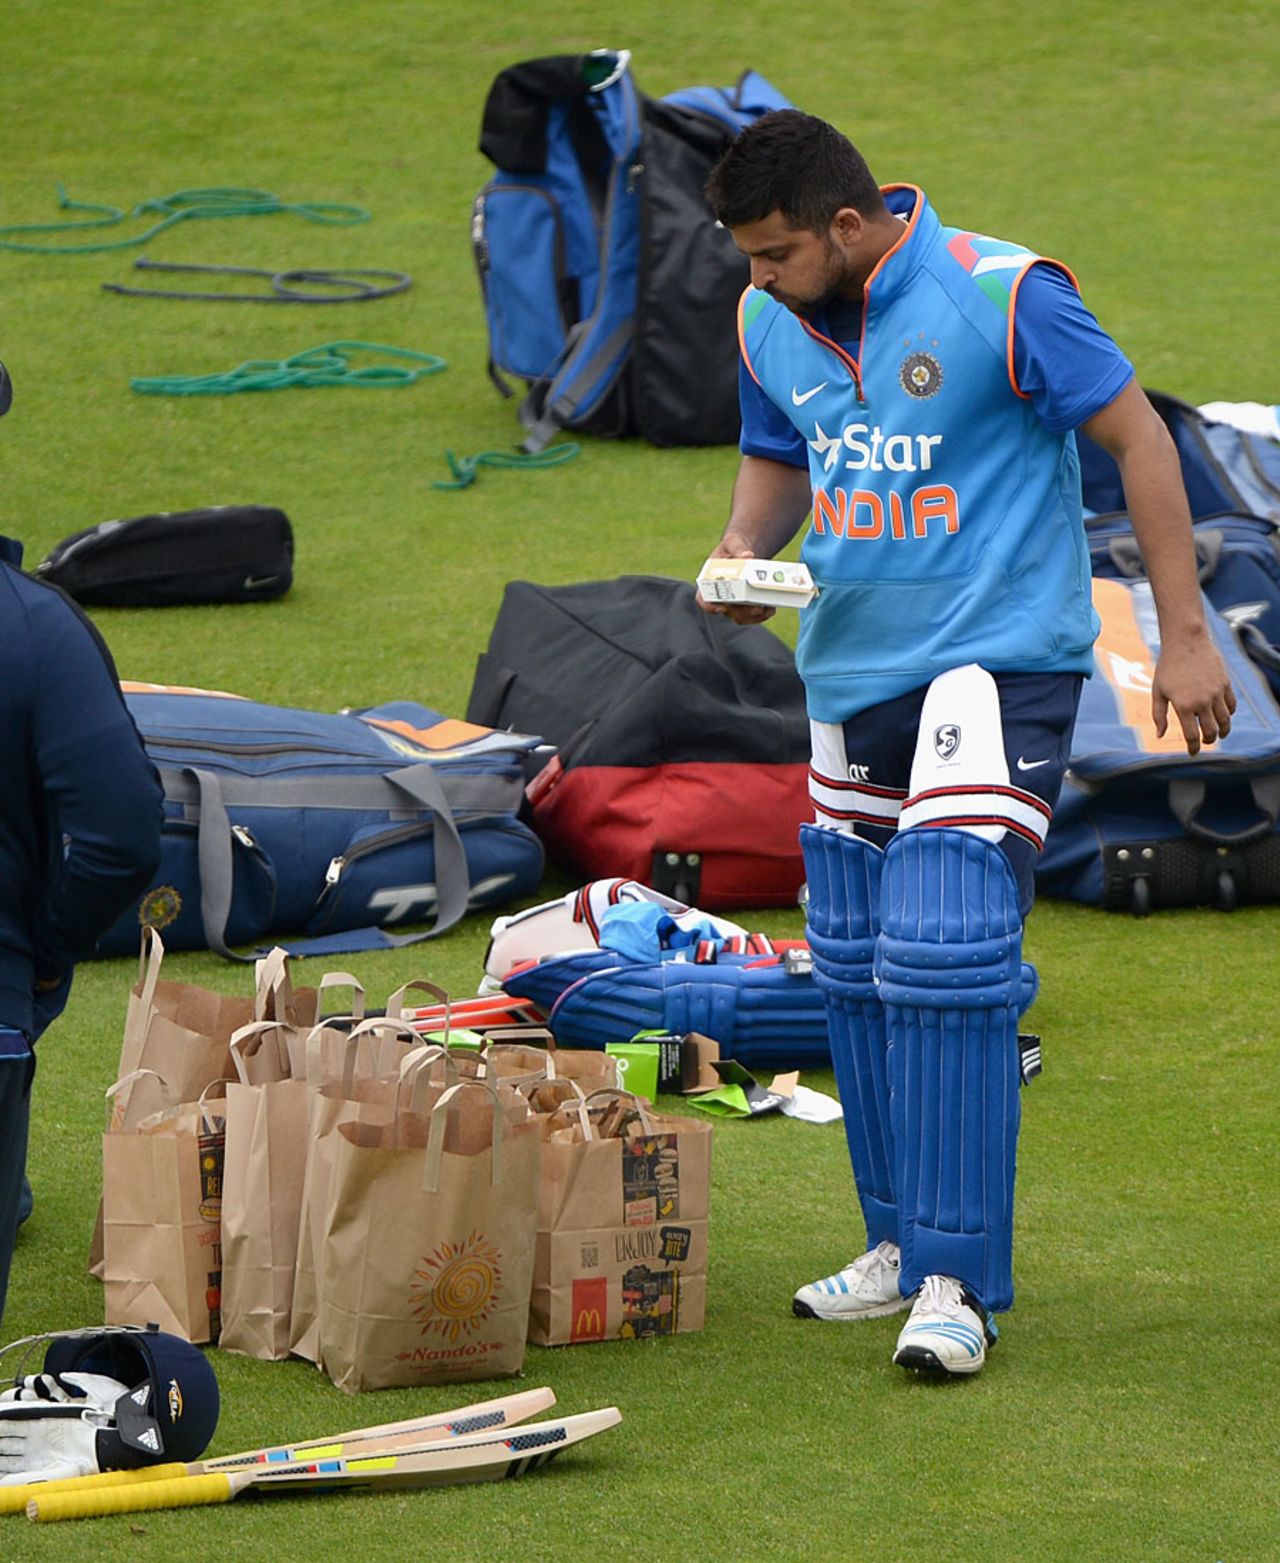 It was lunch on the go for India at their net session, Headingley, September 4, 2014